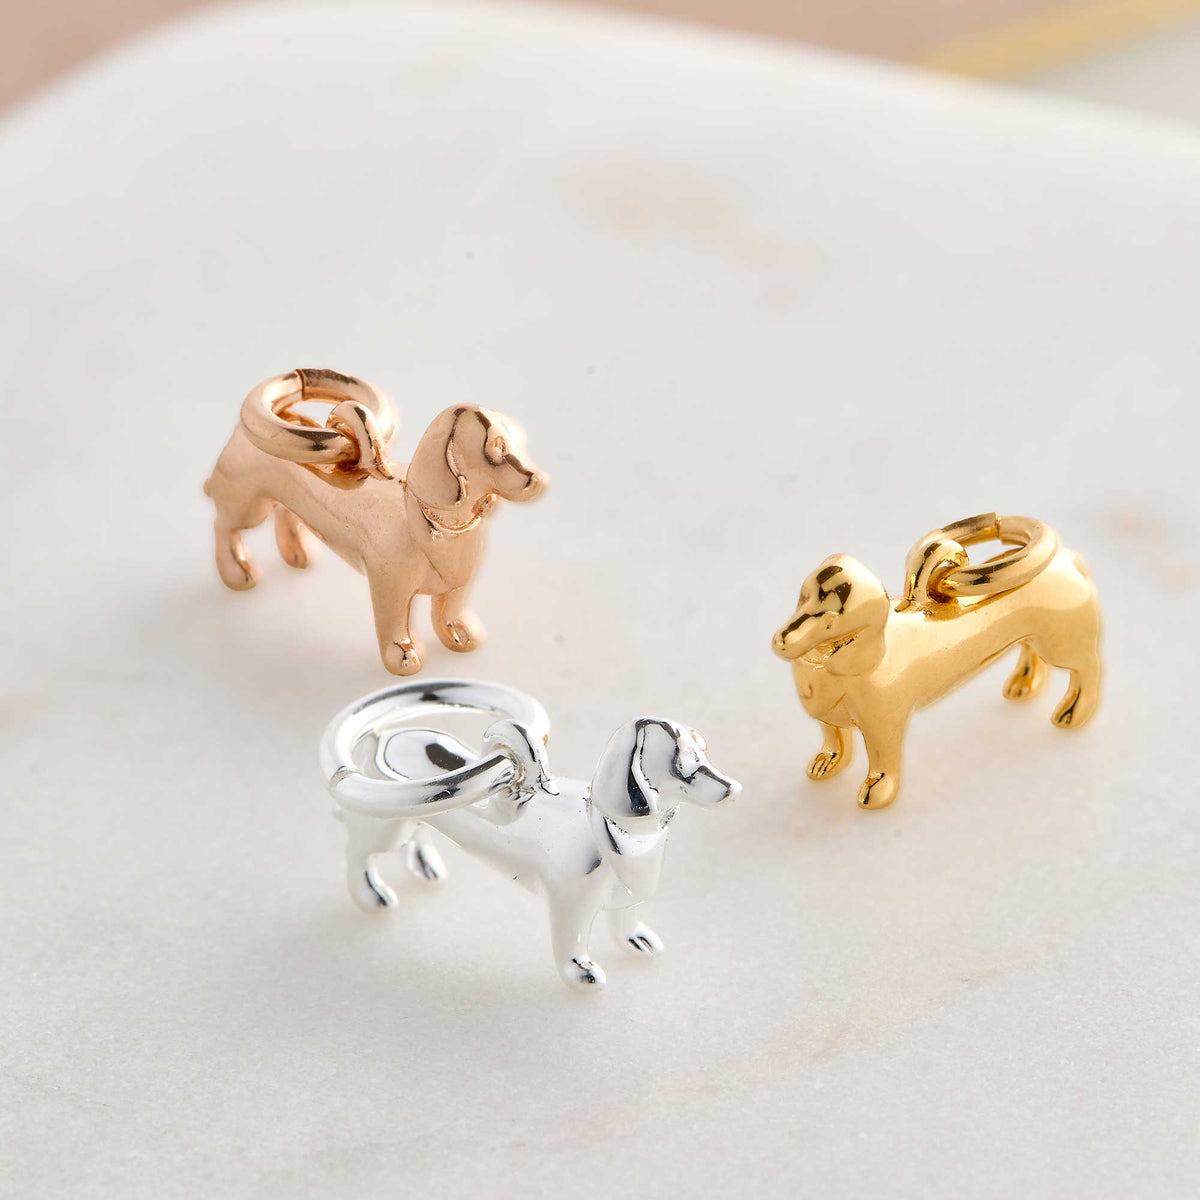 gold rose gold silver sausage dog charms scarlett jewellery